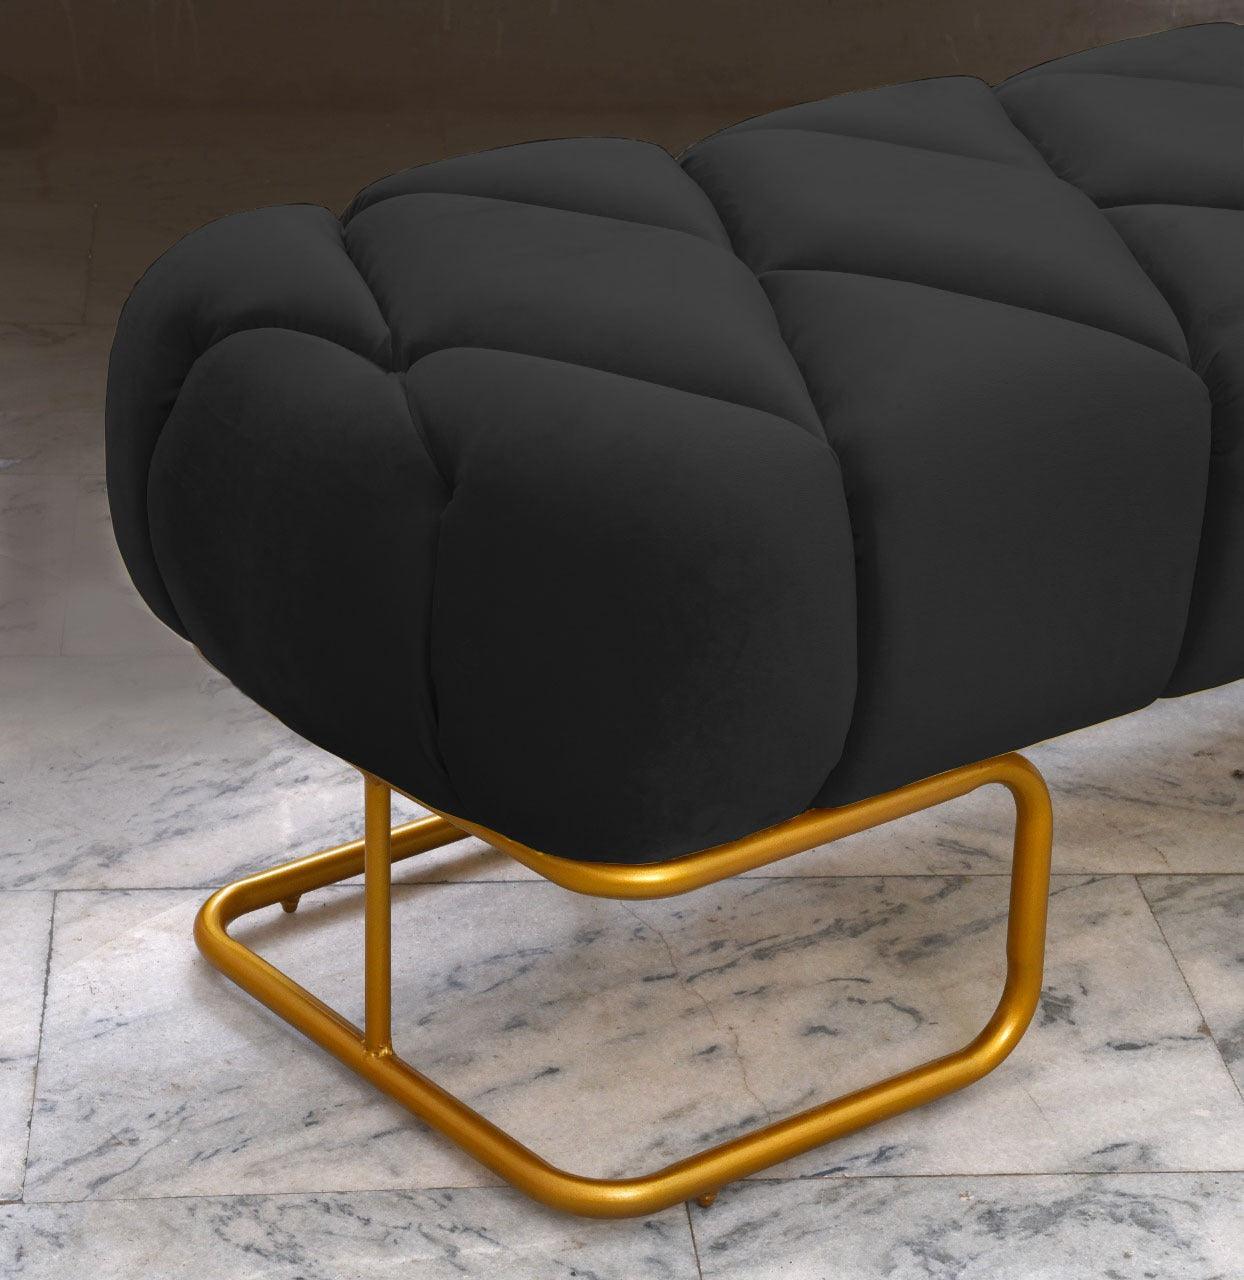 Luxury 3 Seater Poufy Steel Stool With Steel Frame -1055 - 92Bedding